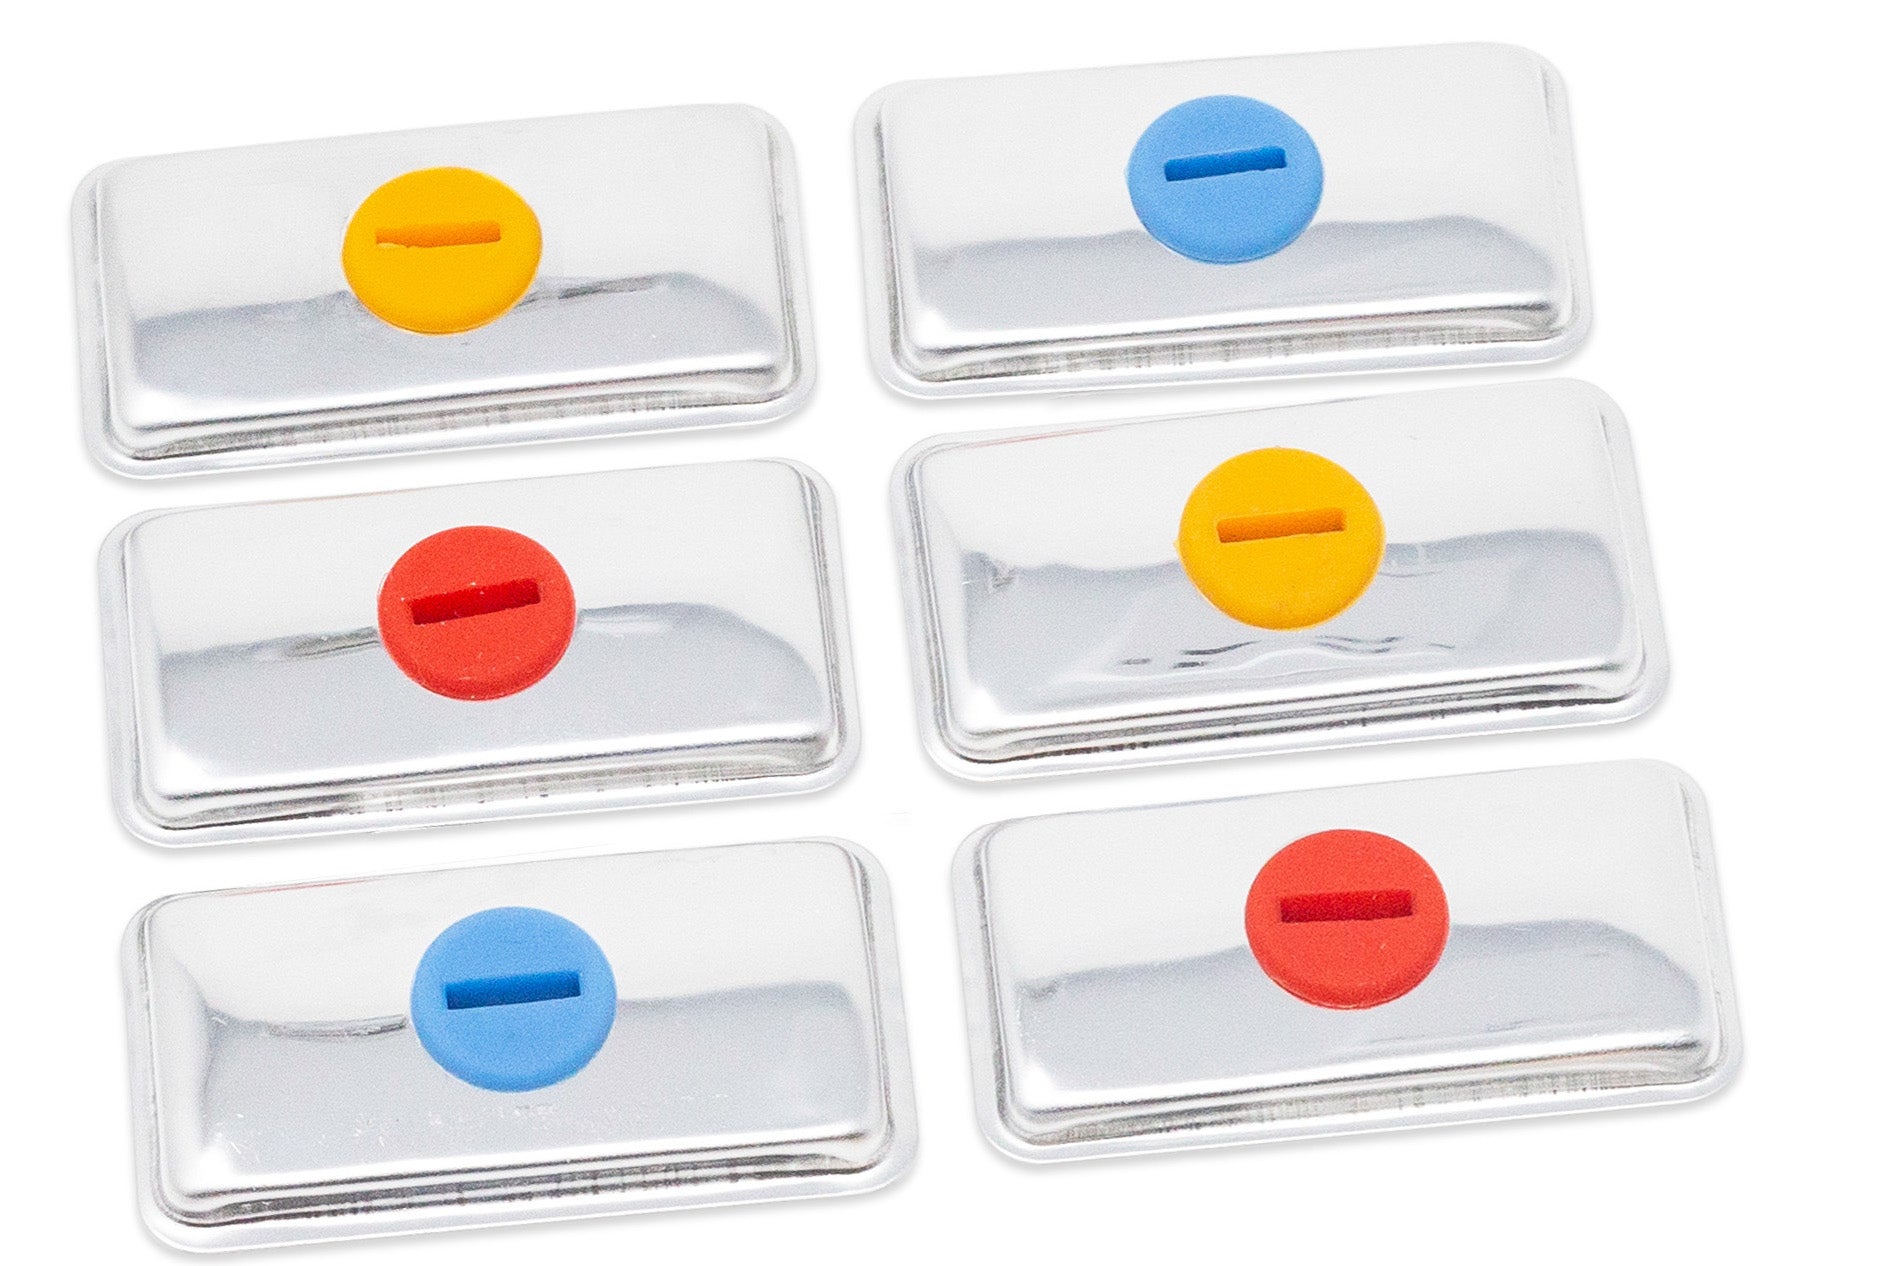 Copy of Lids for Square MINI Popsicle Molds with Steel Sticks